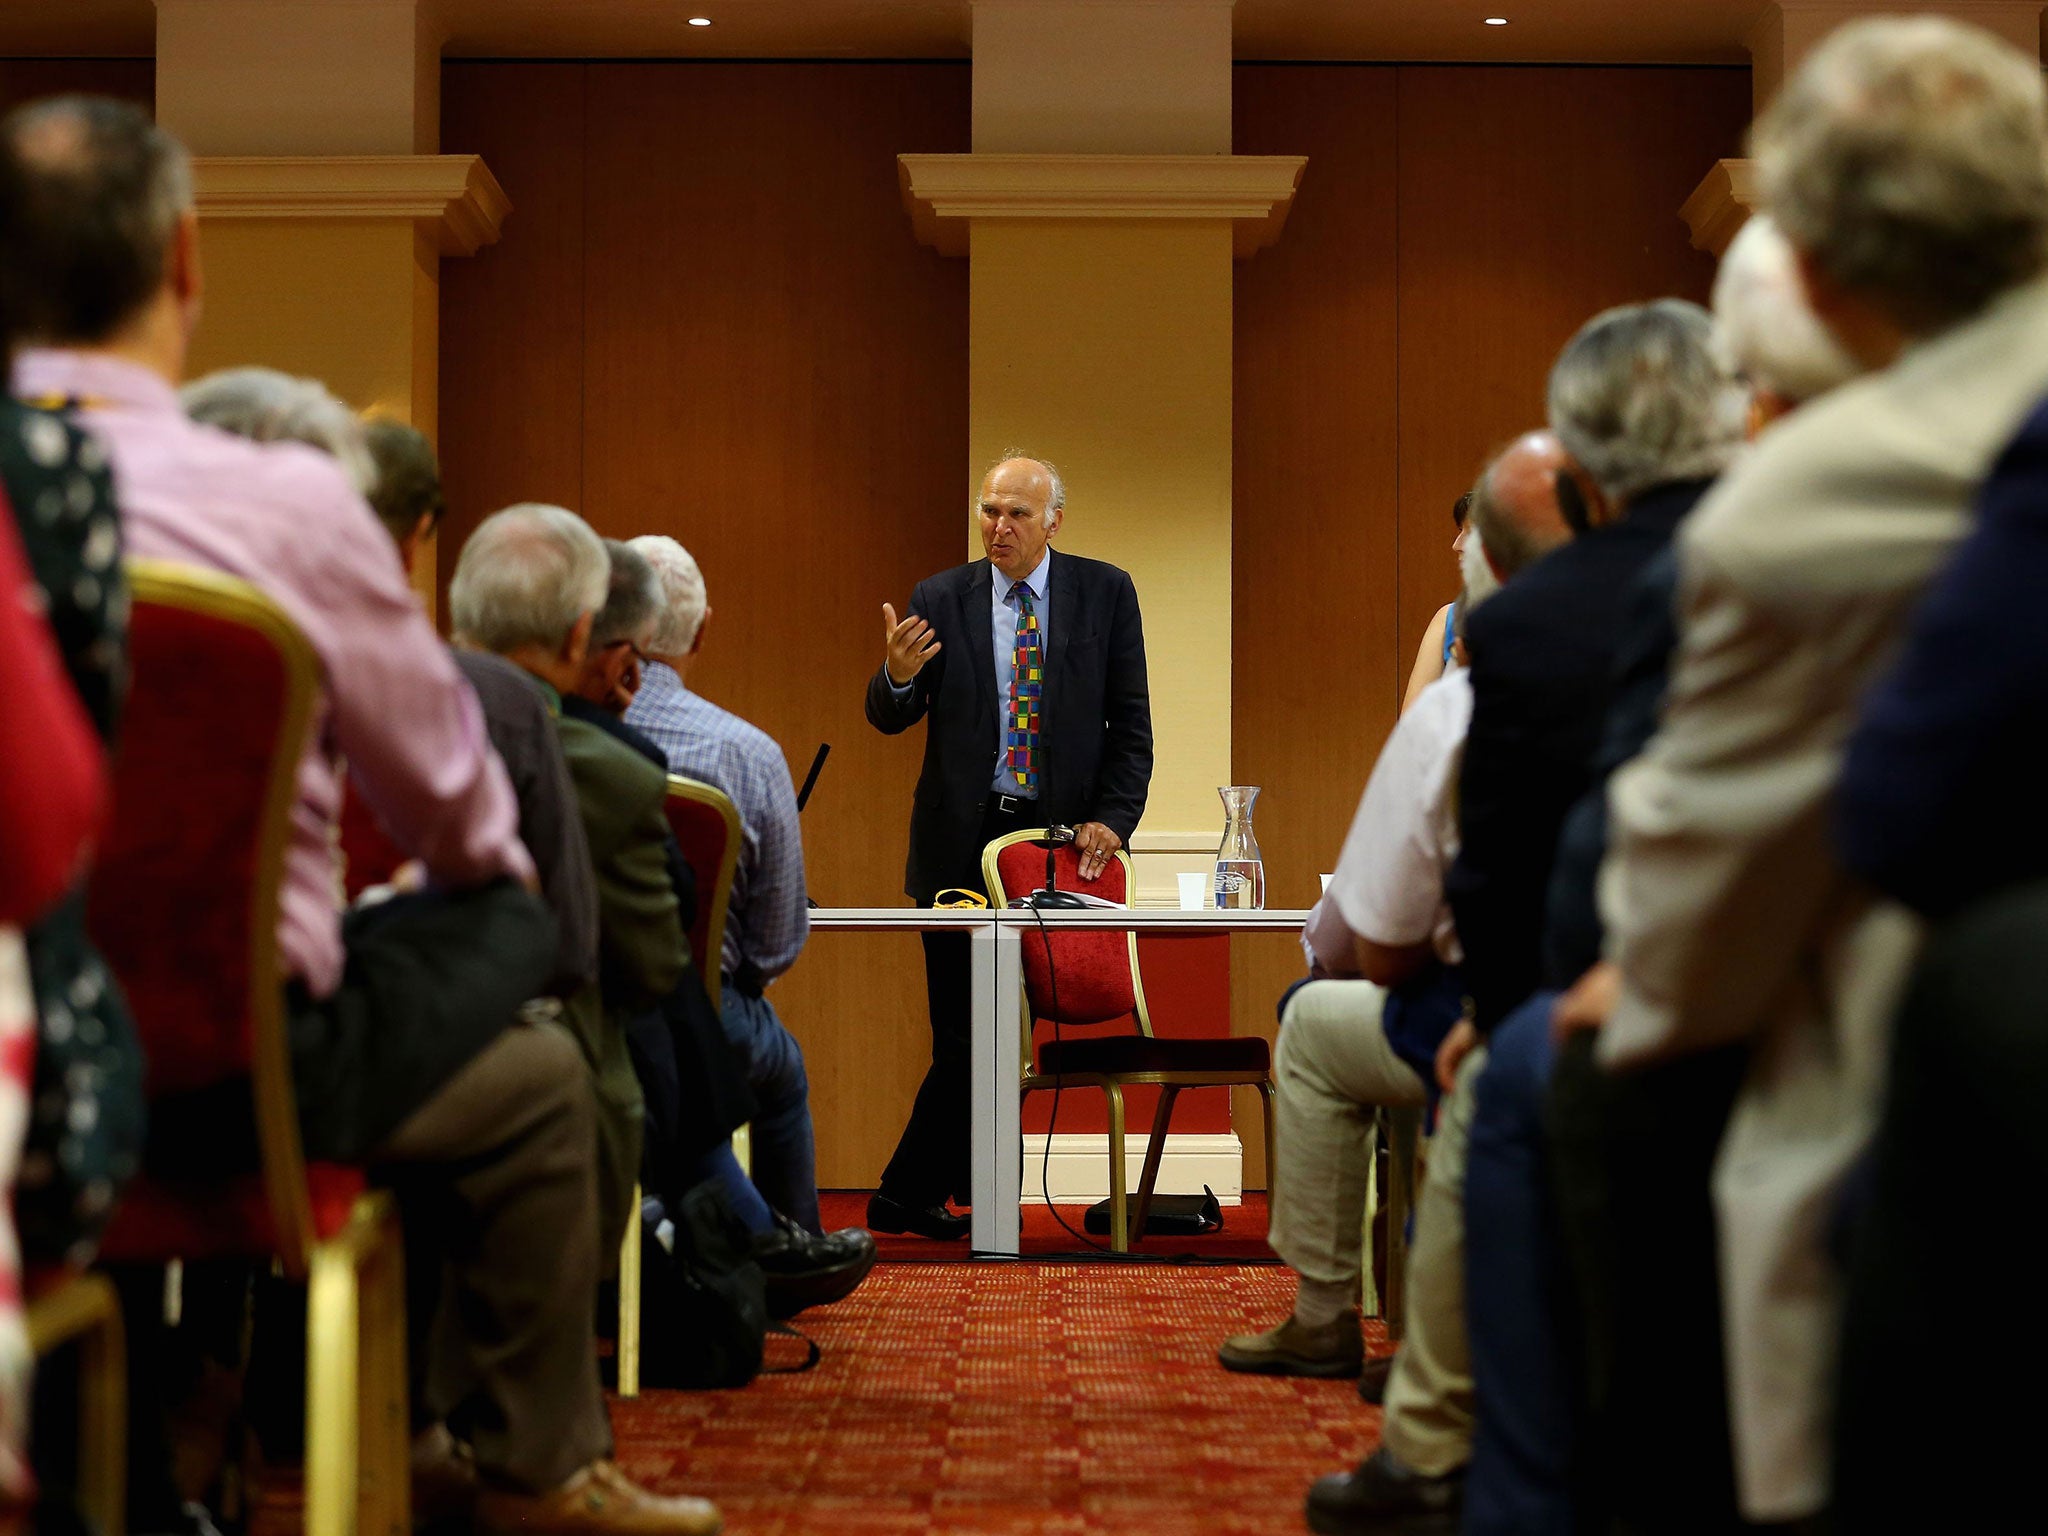 Vince Cable speaks during a fringe event on the third day of the Liberal Democrats Autumn Conference in Brighton